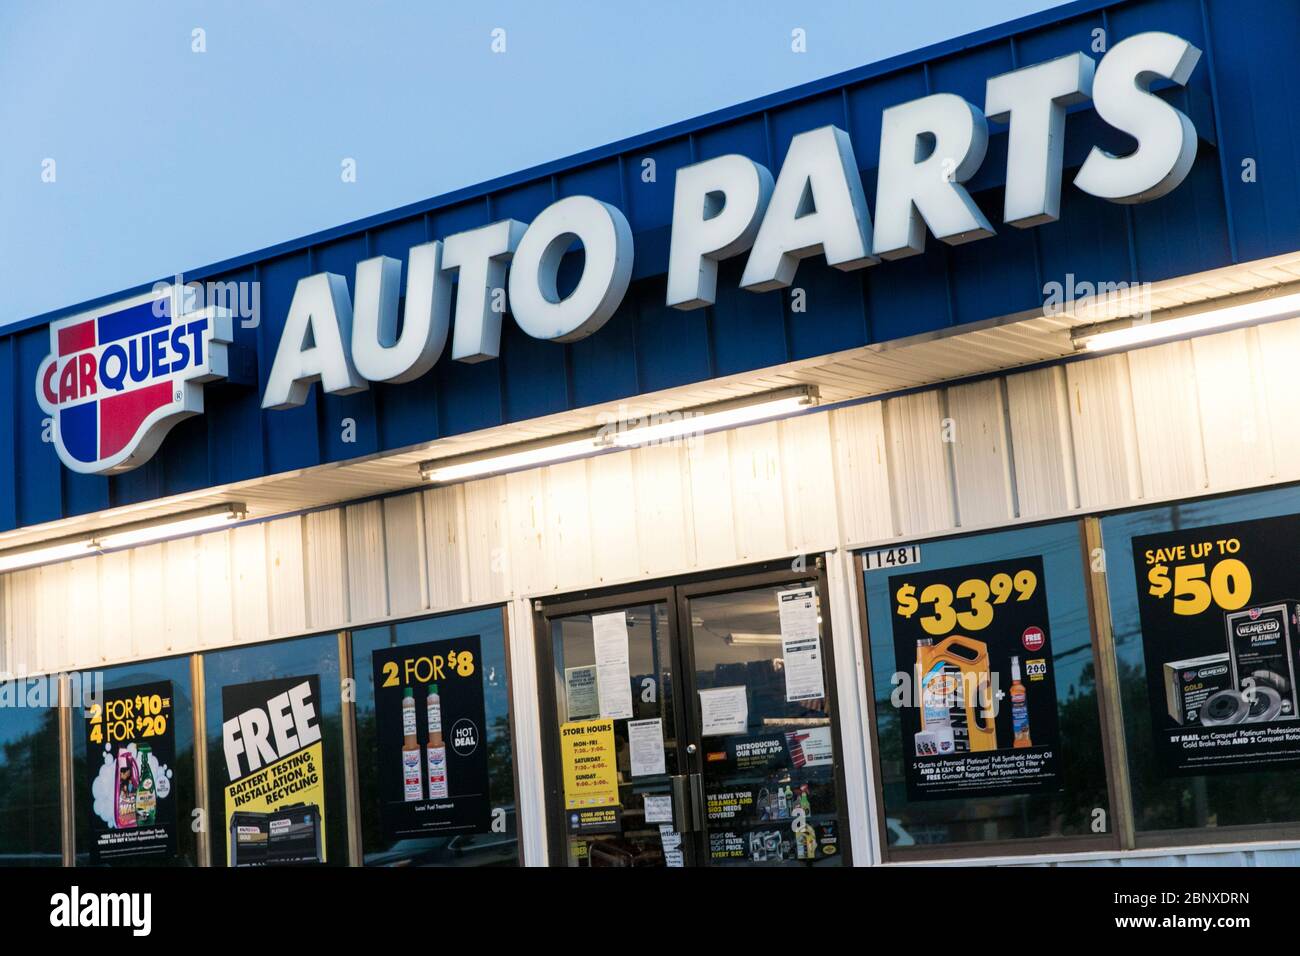 A Logo Sign Outside Of A Carquest Auto Parts Retail Store Location In Richmond Virginia On May 2 Stock Photo Alamy